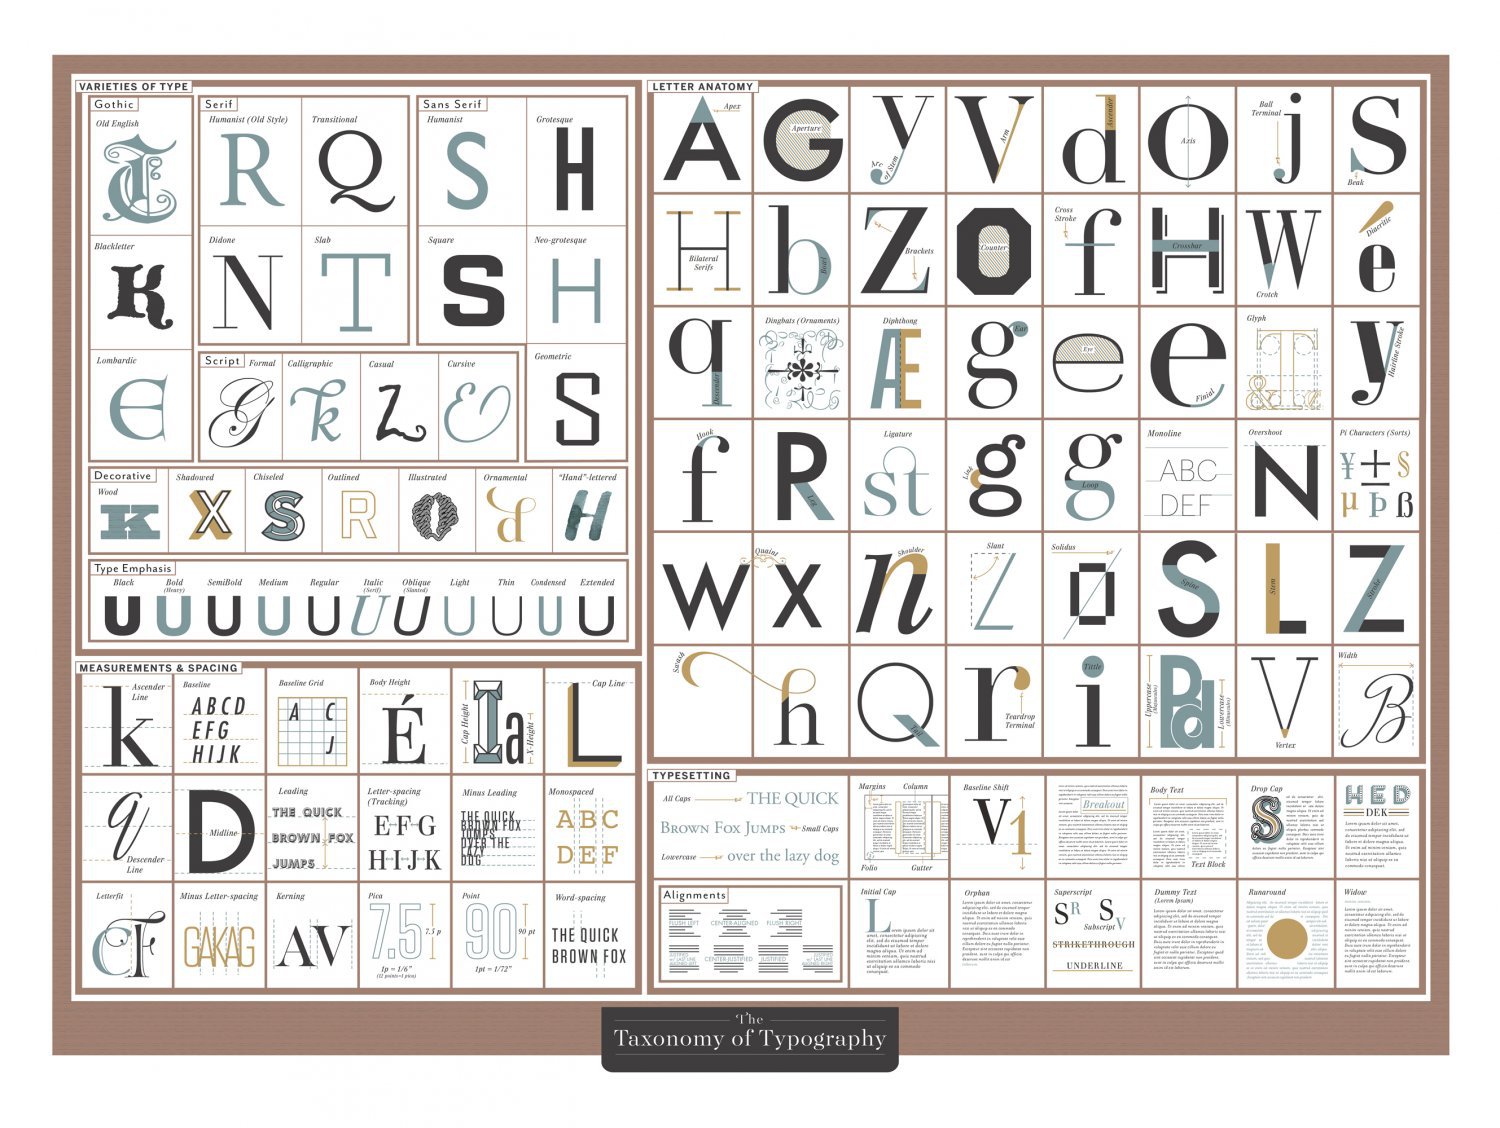 The Taxonomy of Typography Chart 13"x19" (32cm/49cm) Polyester Fabric Poster